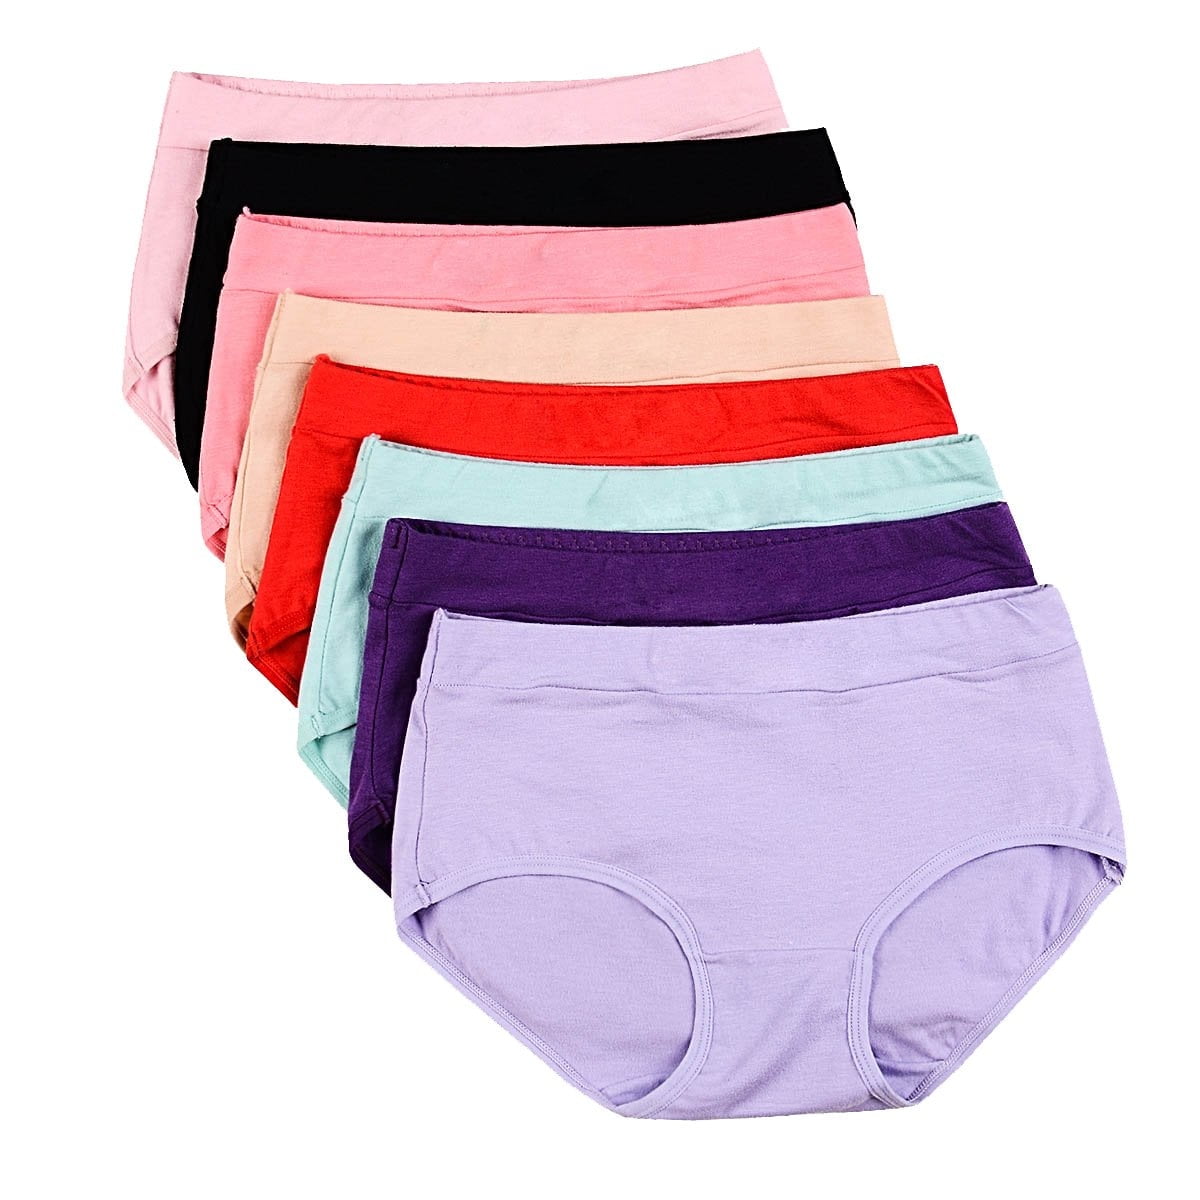 Wholesale Isadora Women's 5pcs Per Pack Full Cut Assorted Colors Cotton  Briefs With Size Options(48 Packs)